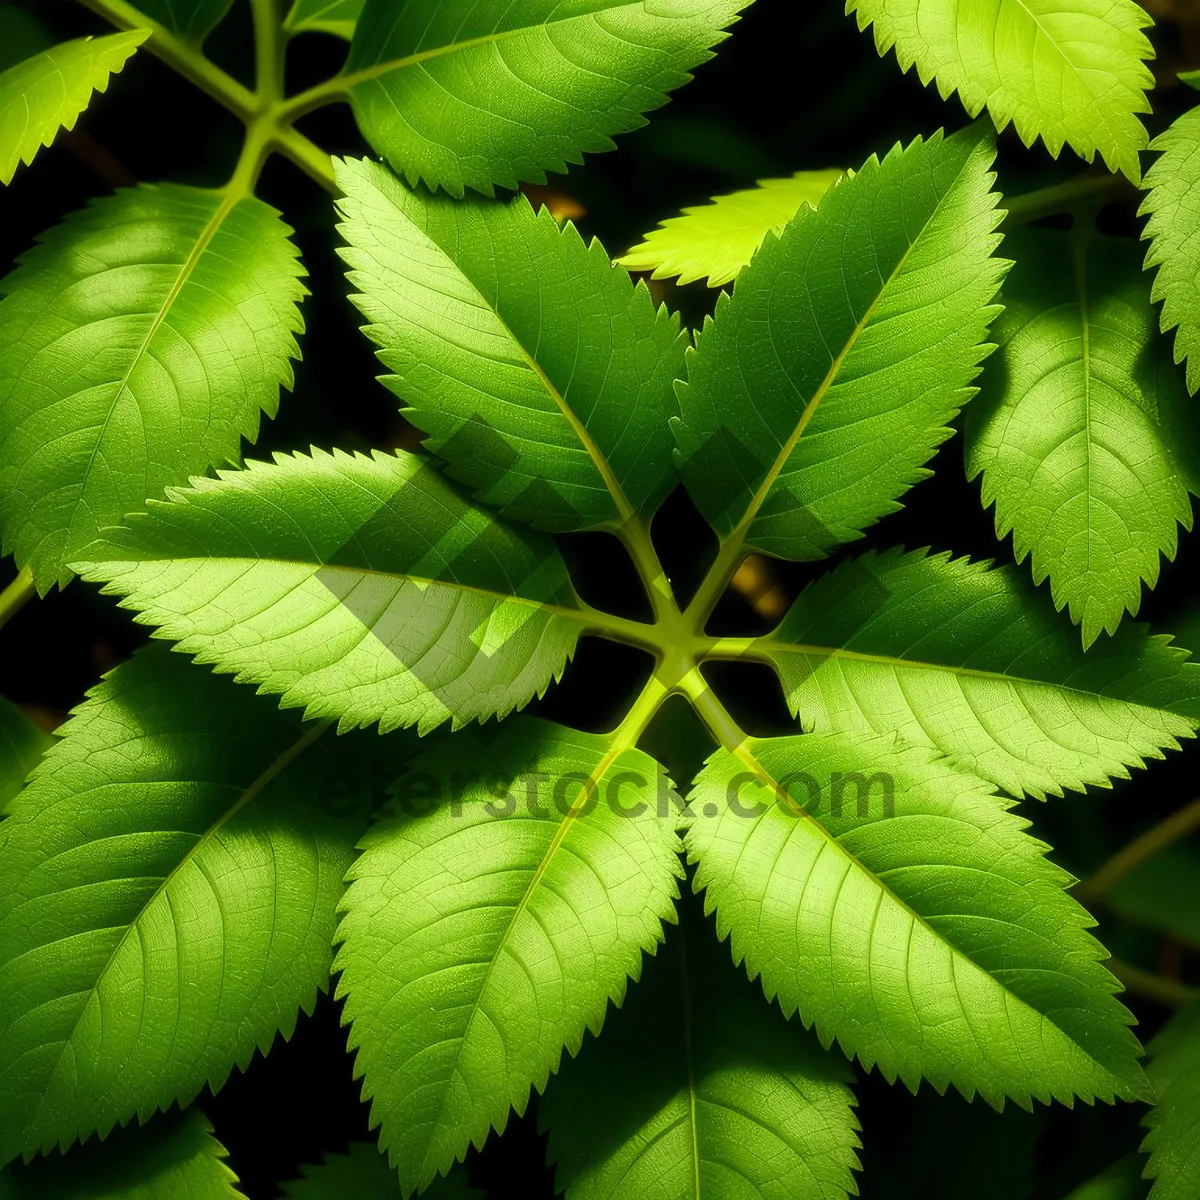 Picture of Lush Spring Forest Foliage, Vibrant and Growing.